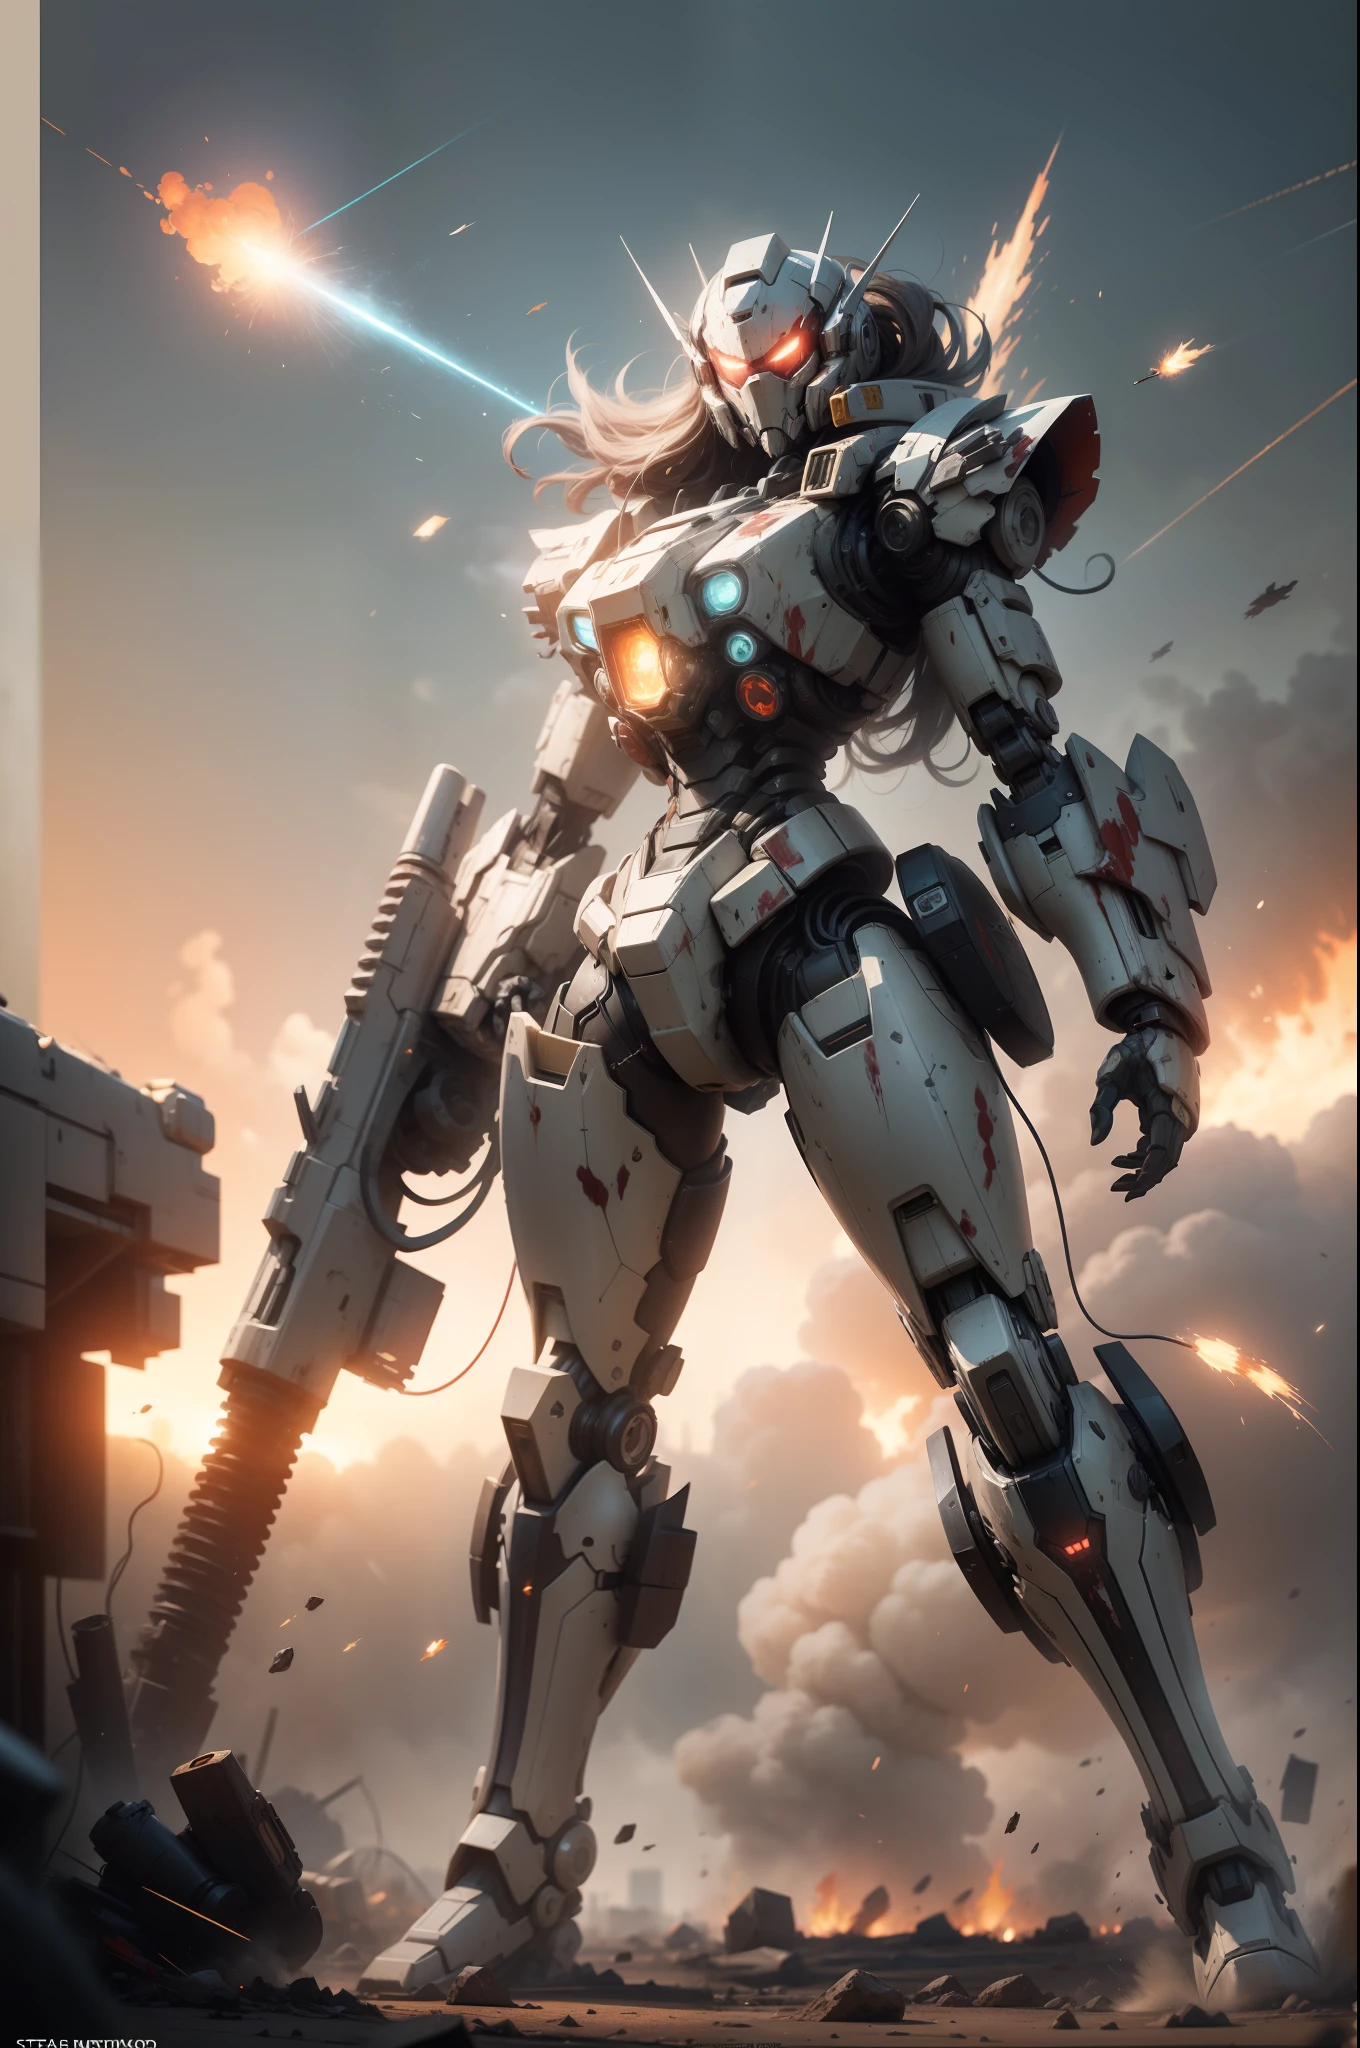 Look up at the perspective，（Digital artwork：1.3）（a sketch：1.1）Octane renders a wasteland，Swirling thick clouds，smog，Flying machines in the sky fierce battle，weed，Dilapidated houses，macadam，Sunset，in crimson red，（（A girl in a combat uniform stood in front of the badly damaged and broken mech）），（（The girl's long messy hair fluttered，Blood，Close-up of the）），（Stubborn），（Steadfast），（There is blood at the corner of the mouth），（Messy long hair flying），（（（The mech was spattered with blood））），（Mars splashes），（（Broken upper body mech，Dropped mech fragments）），（Exposed wires），（（Mecha is depicted finely）），（（（ultra fine））），Shoot at 8K resolution，Gasoline liquid，firelight，Missiles streaked across the sky，weeds，macadam，exploding，splash arts，（（Dynamic speed lines：1.2）），Lithography in intricate details，dongh（Light particles：1.2），（game concept：1.3），（deep of field:1.3),Global illumination,well detailed，Trends on ArtStation，Epic shooting，Cinematic lighting